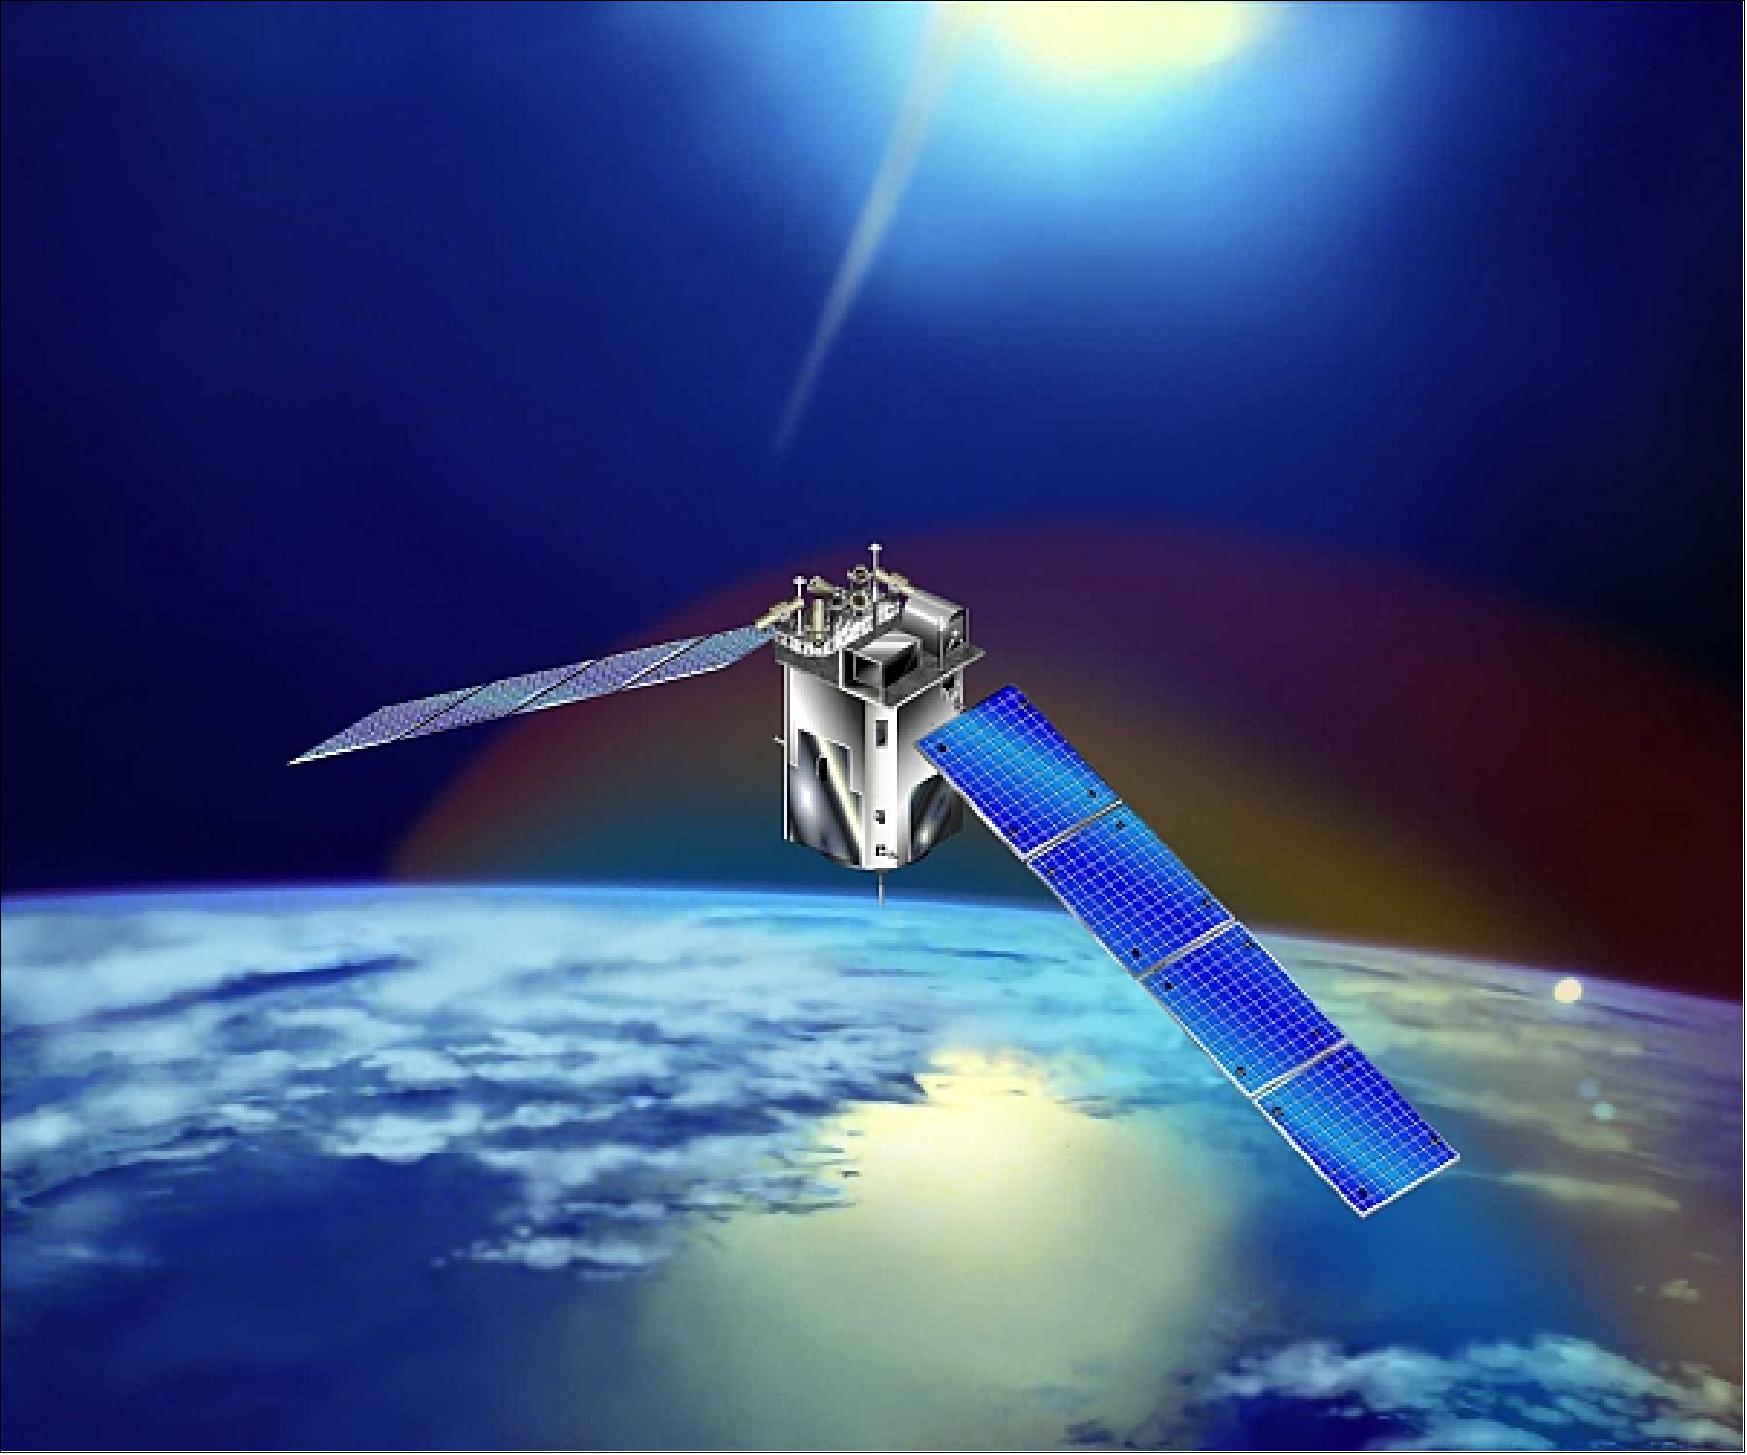 Figure 8: Artist's rendering of the TIMED spacecraft (image credit: NASA and APL)